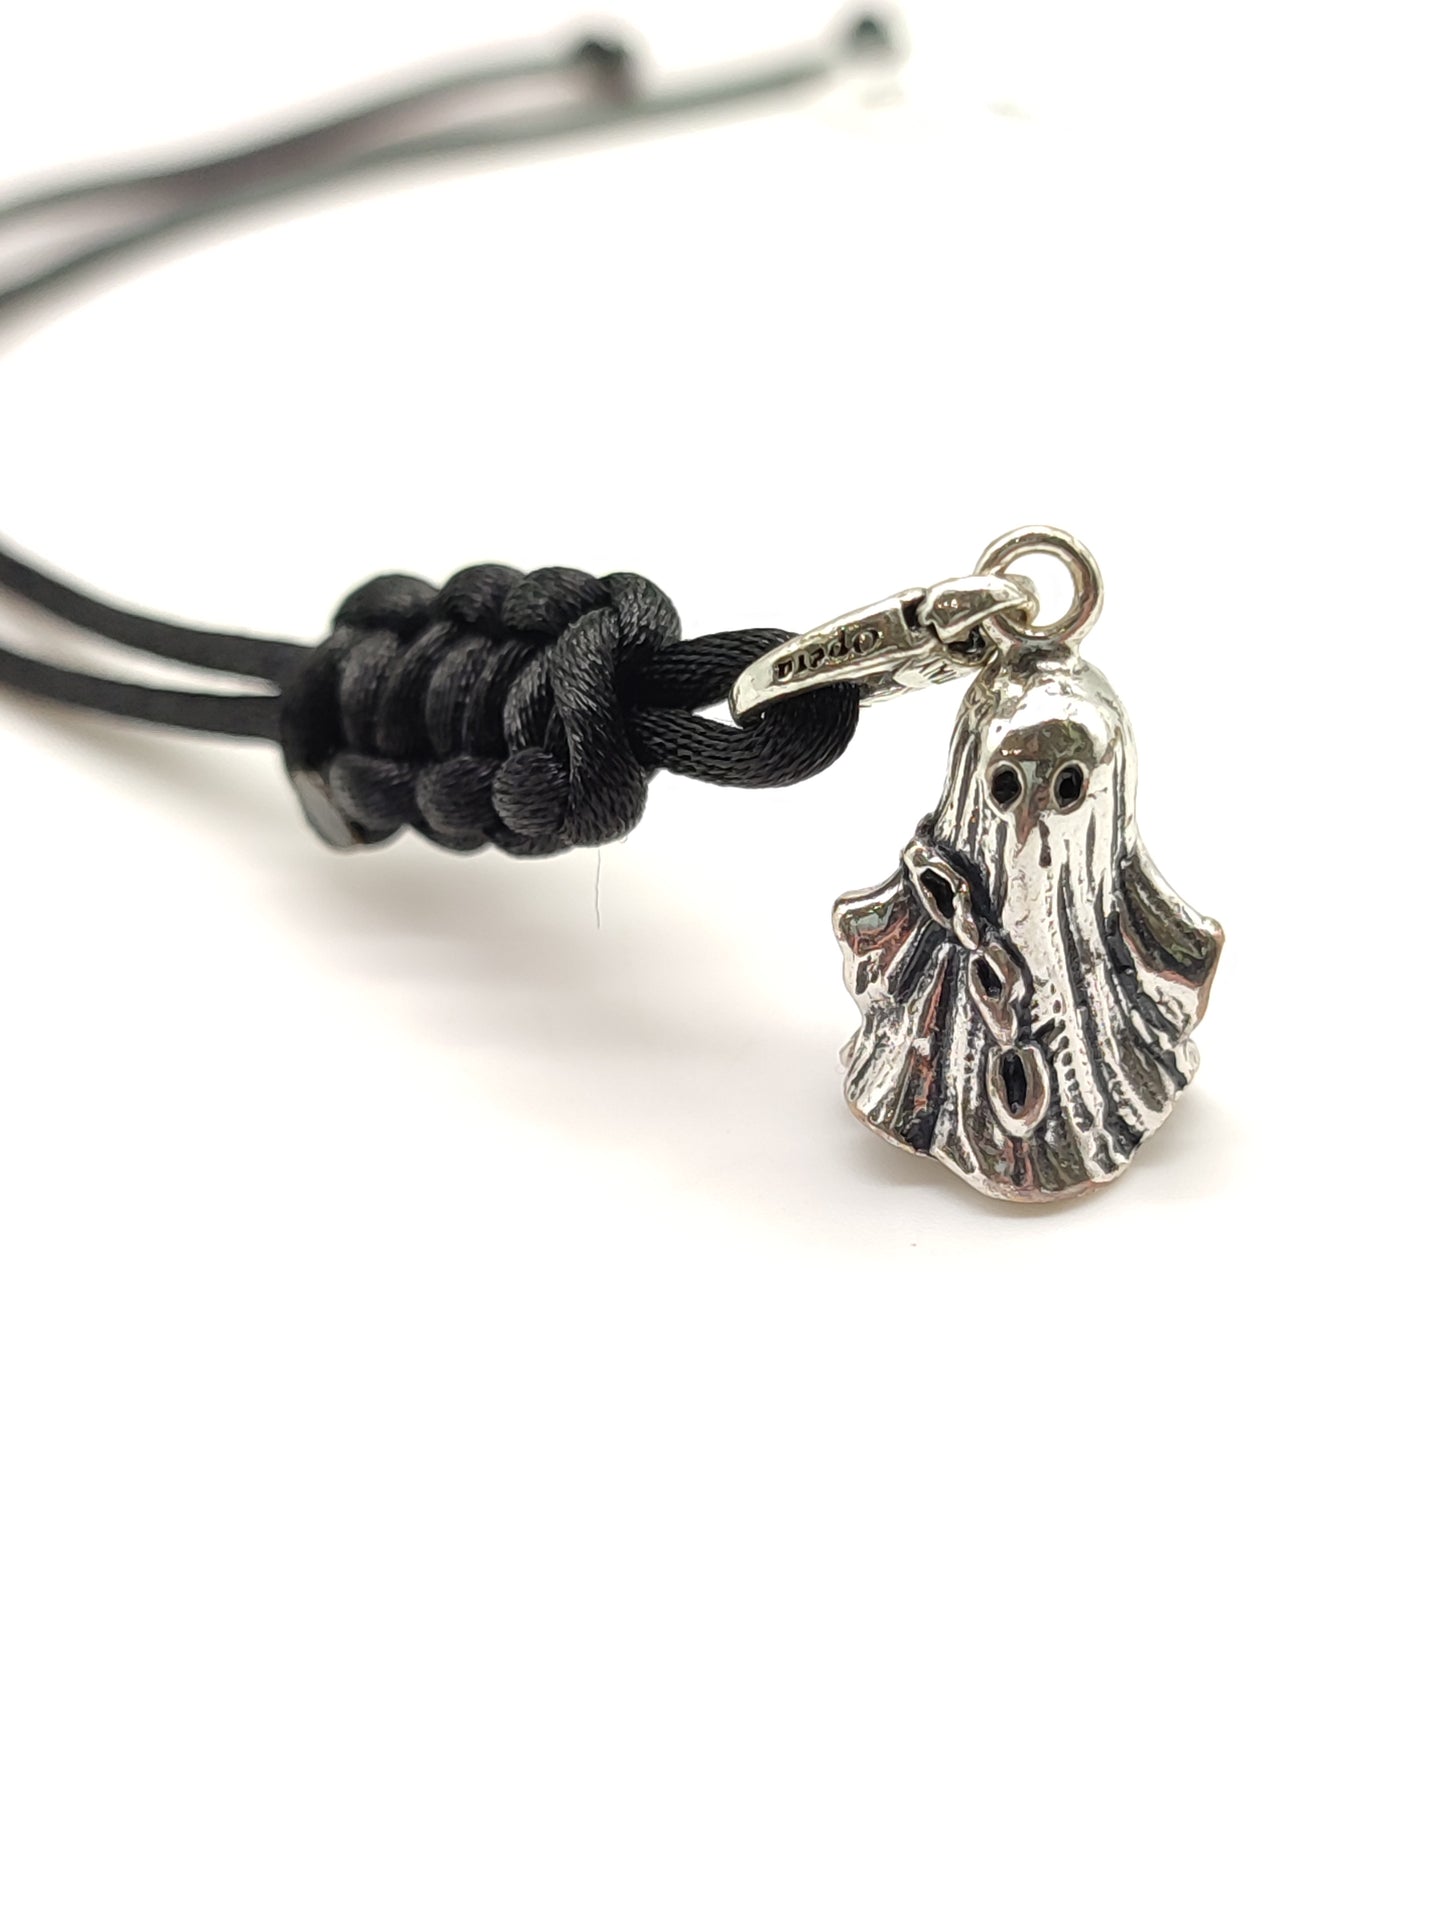 Silver ghost key ring with satin cord